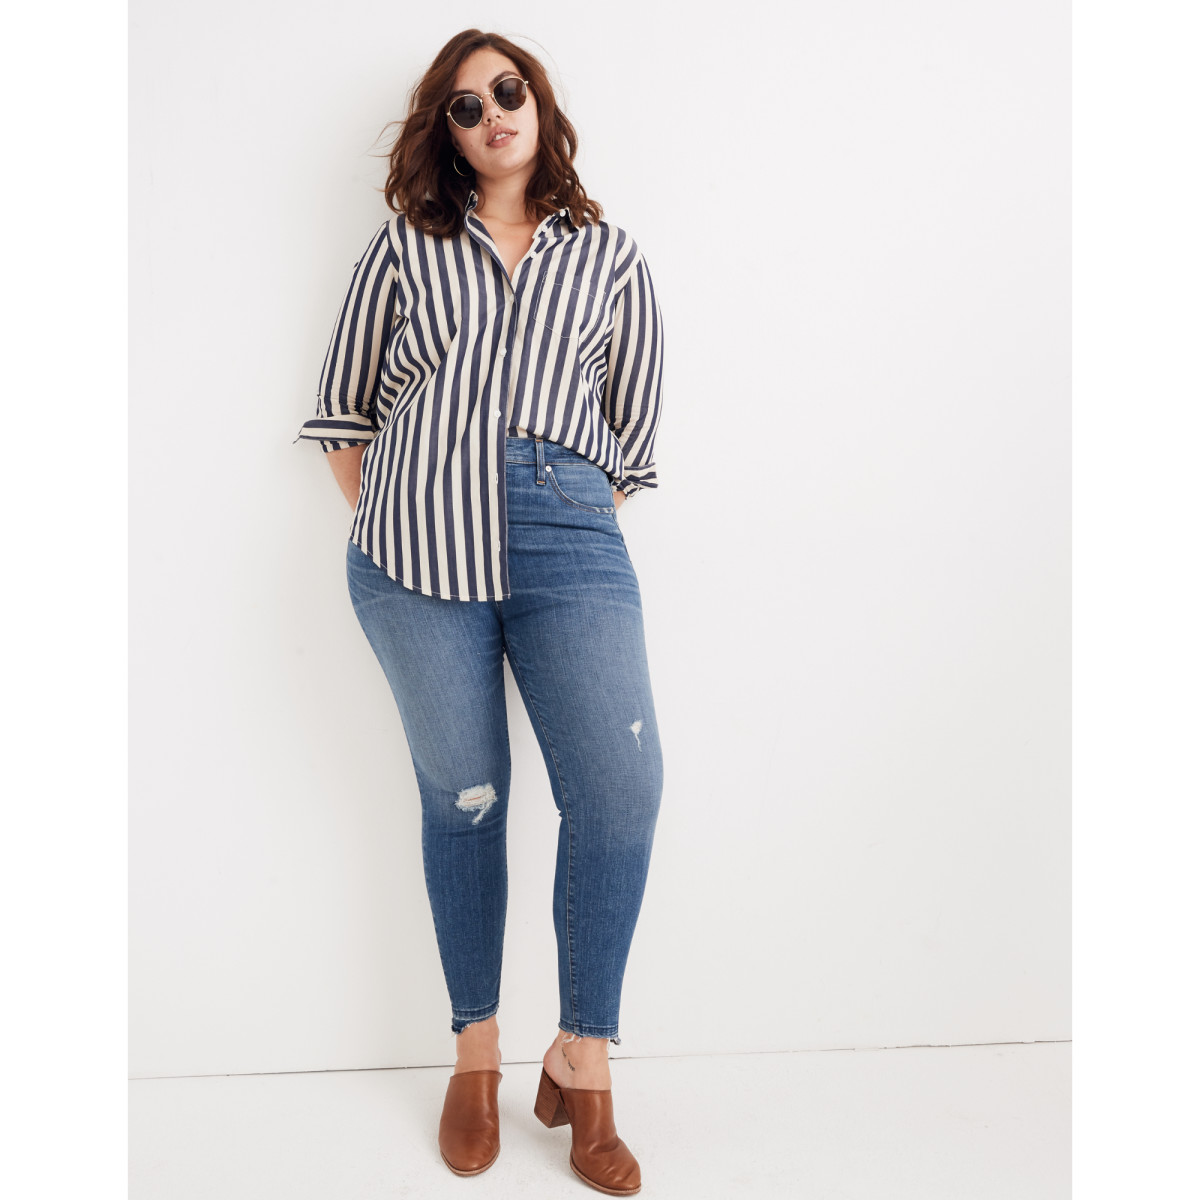 A look from Madewell's new extended sizing. Photo: Madewell